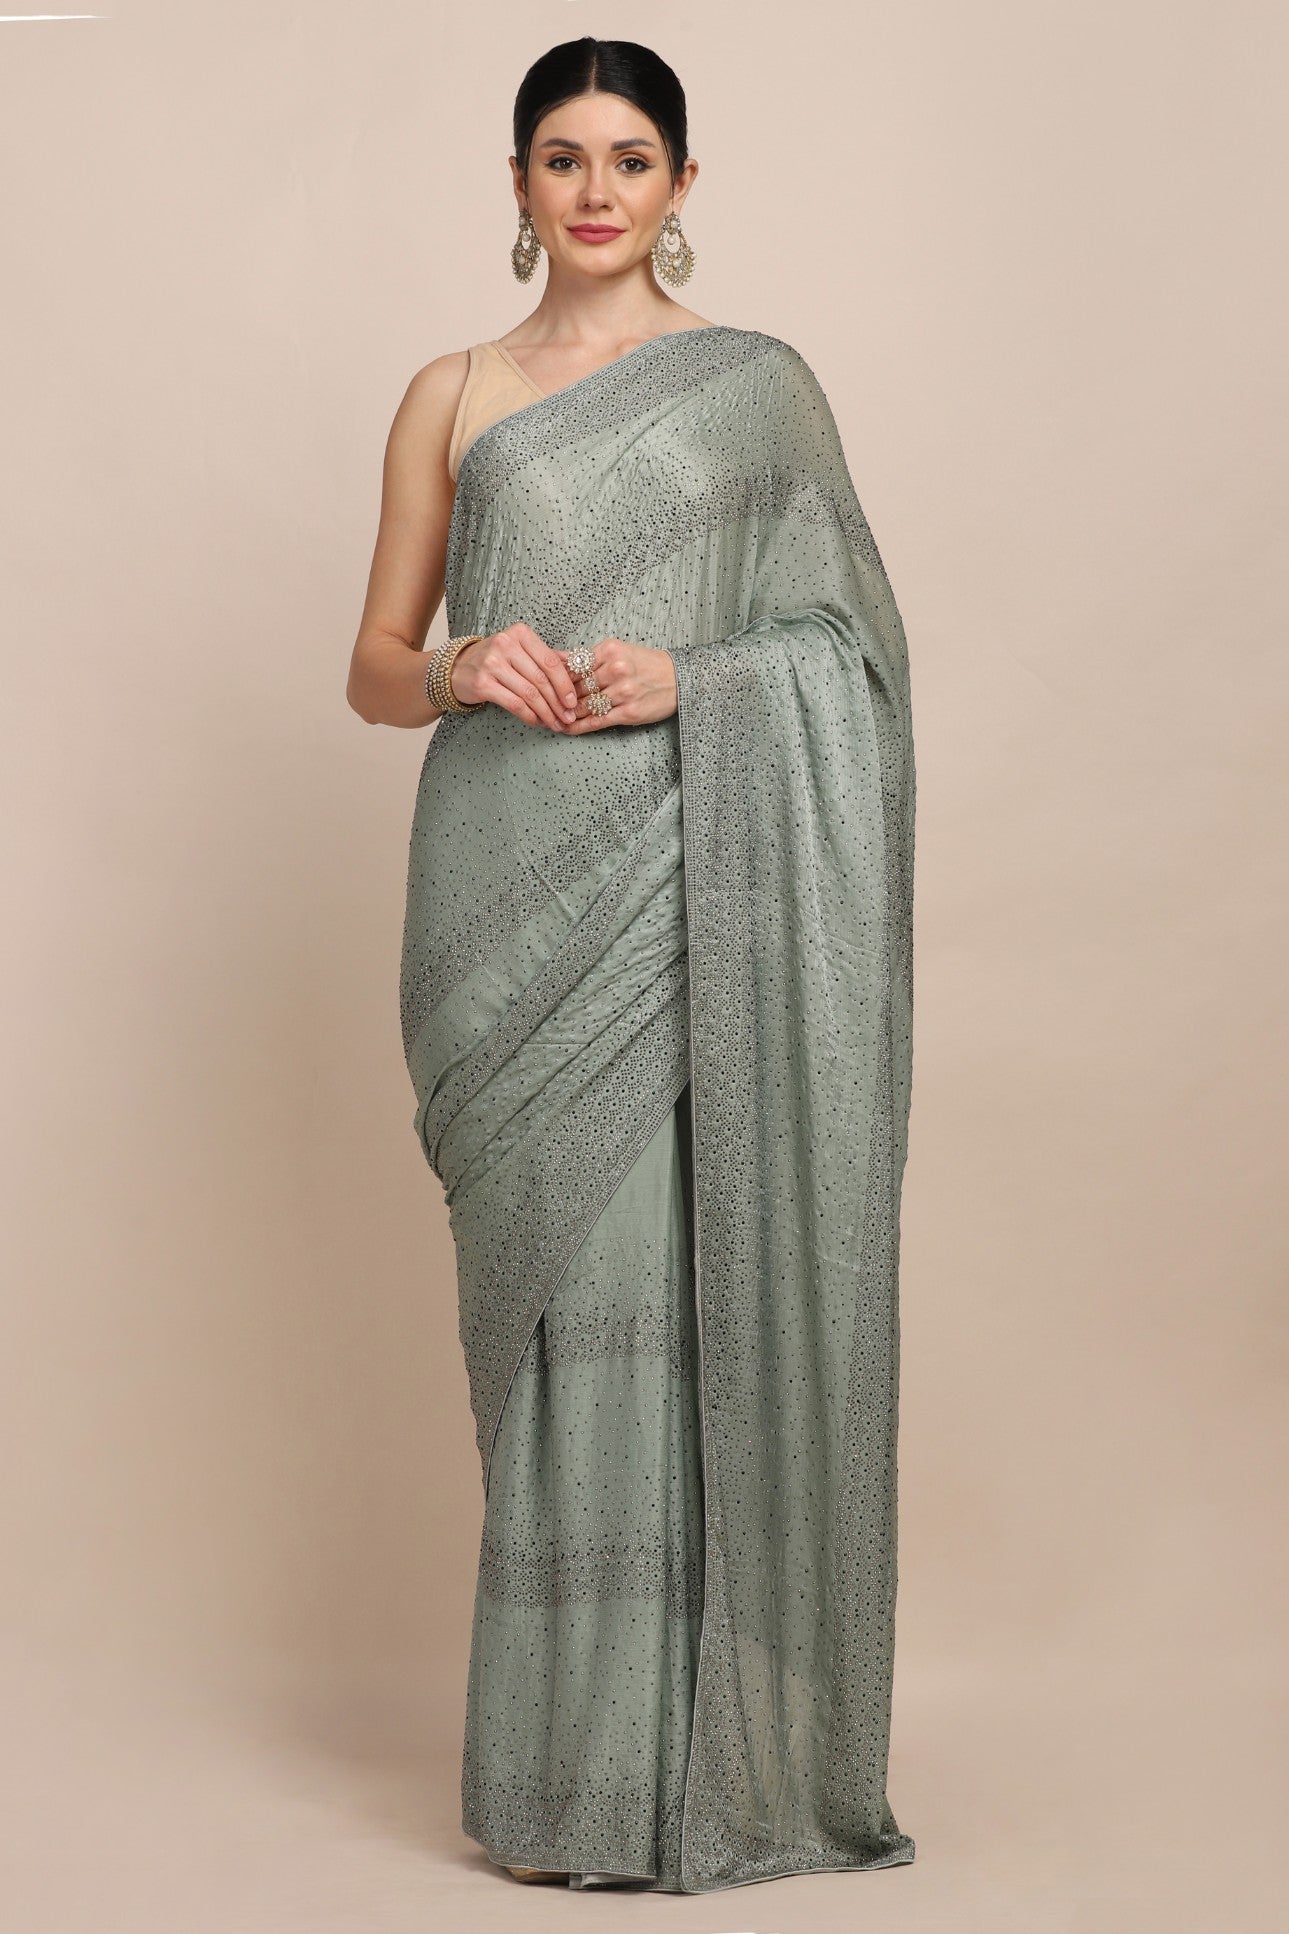 Classy green color embroidered saree